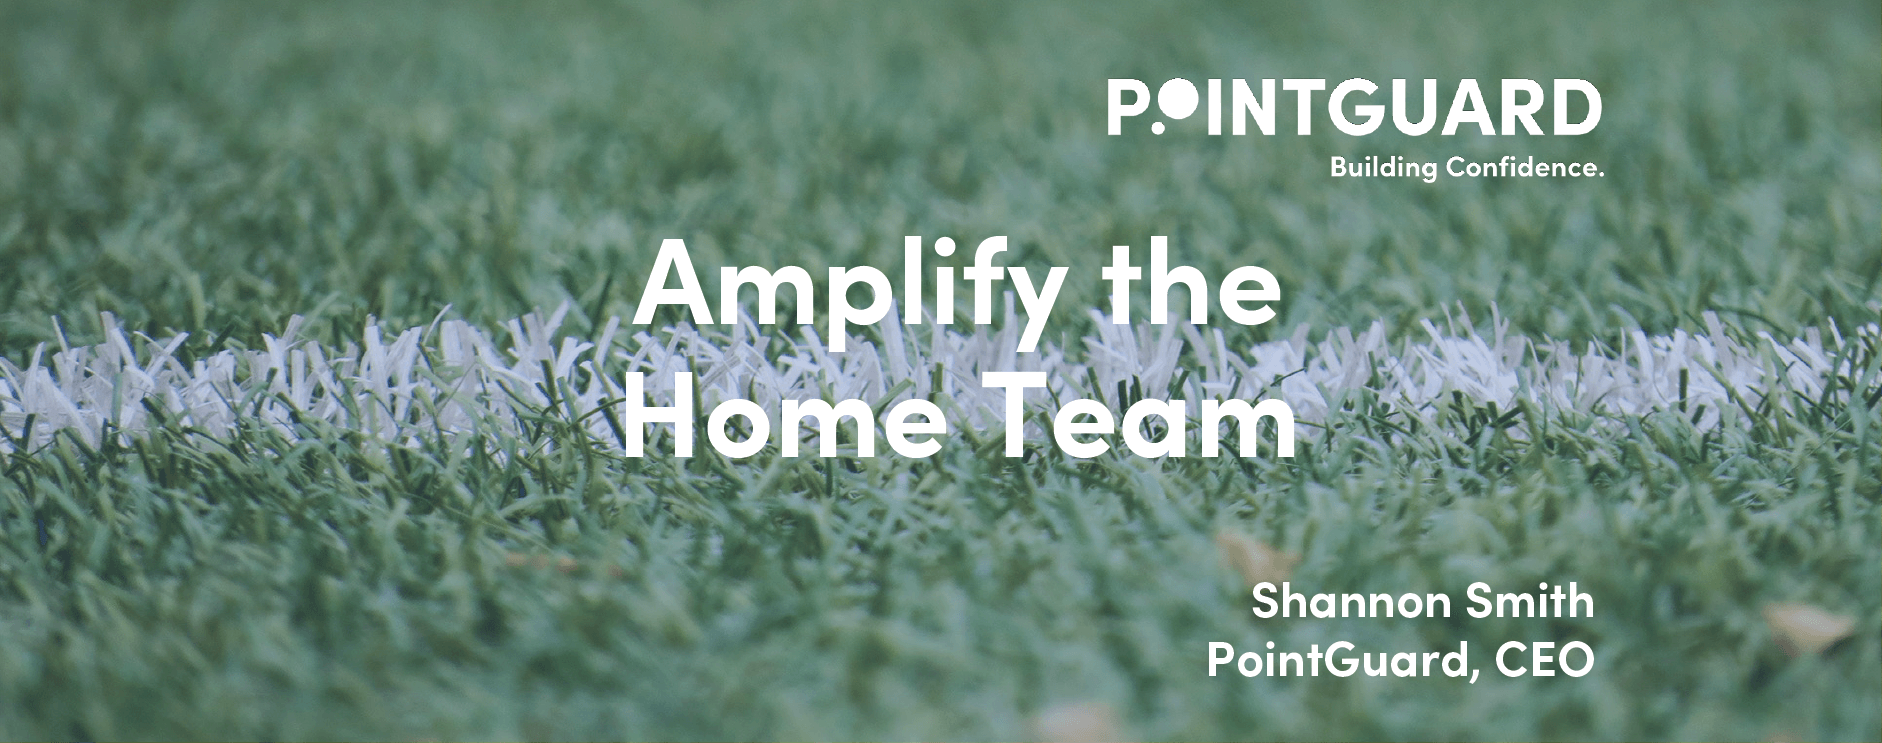 Amplify the Home Team